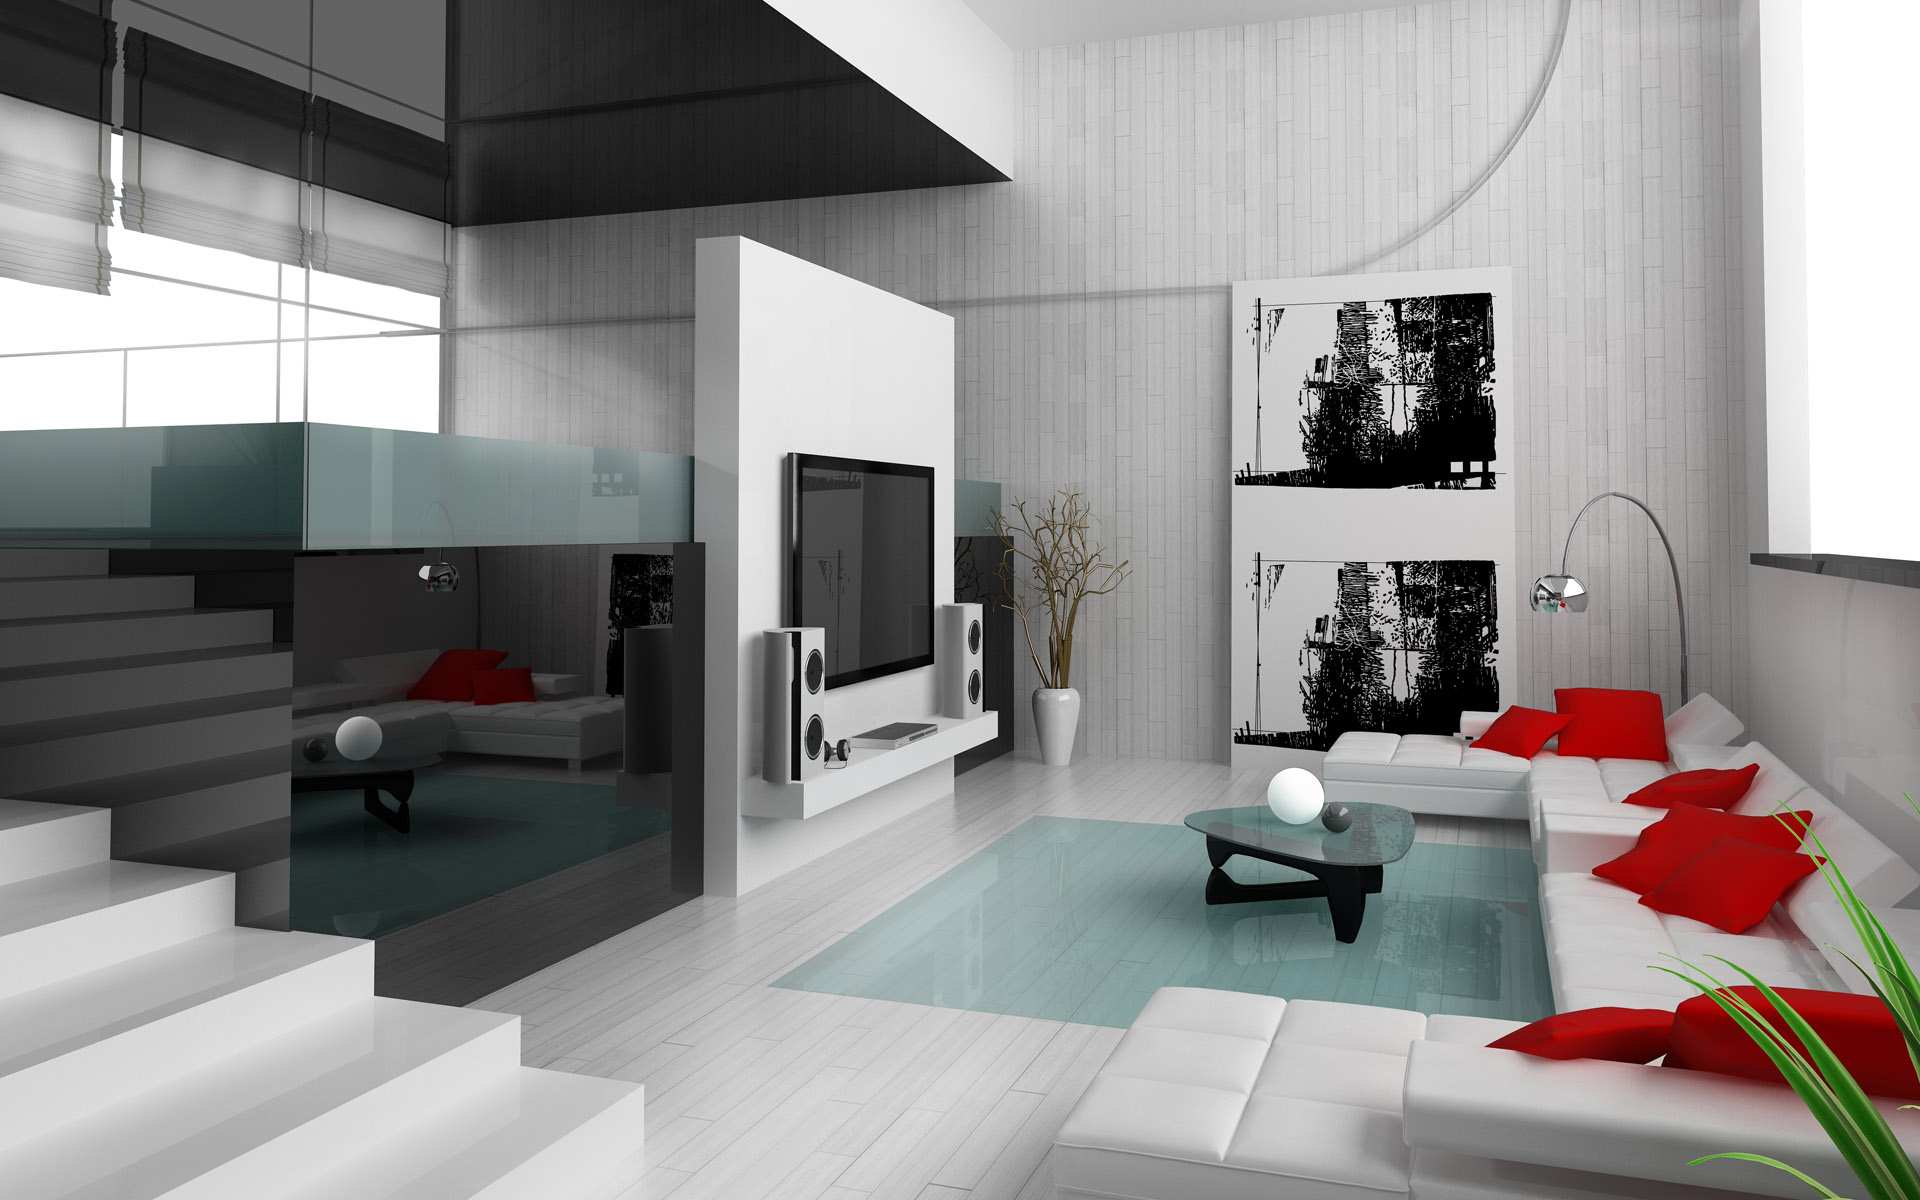 Modern Interior Design 10415 Hd Wallpapers in Architecture   Imagesci